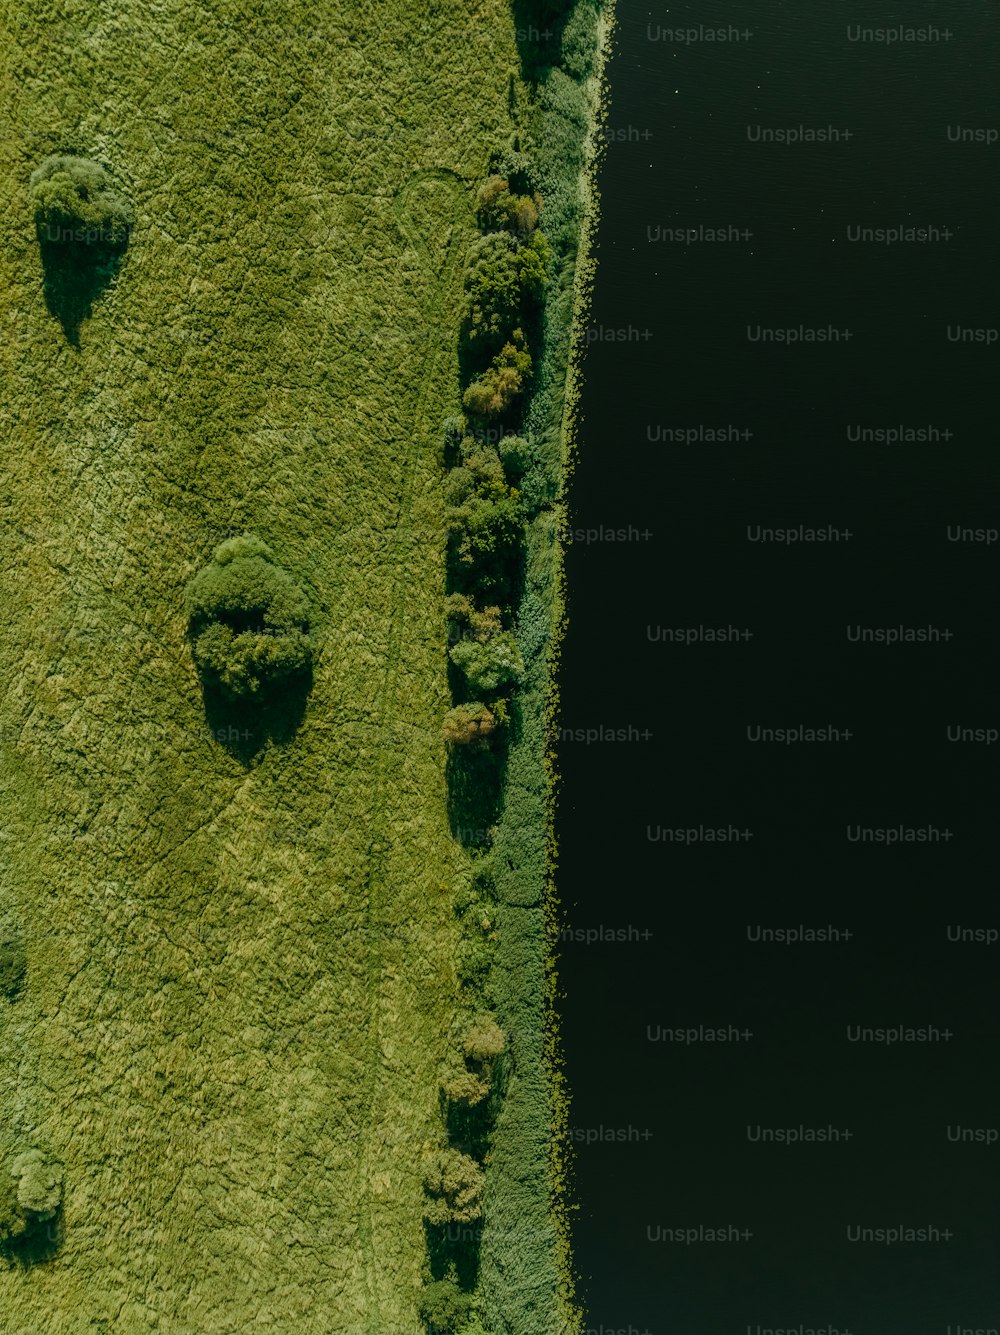 an aerial view of a grassy field with trees